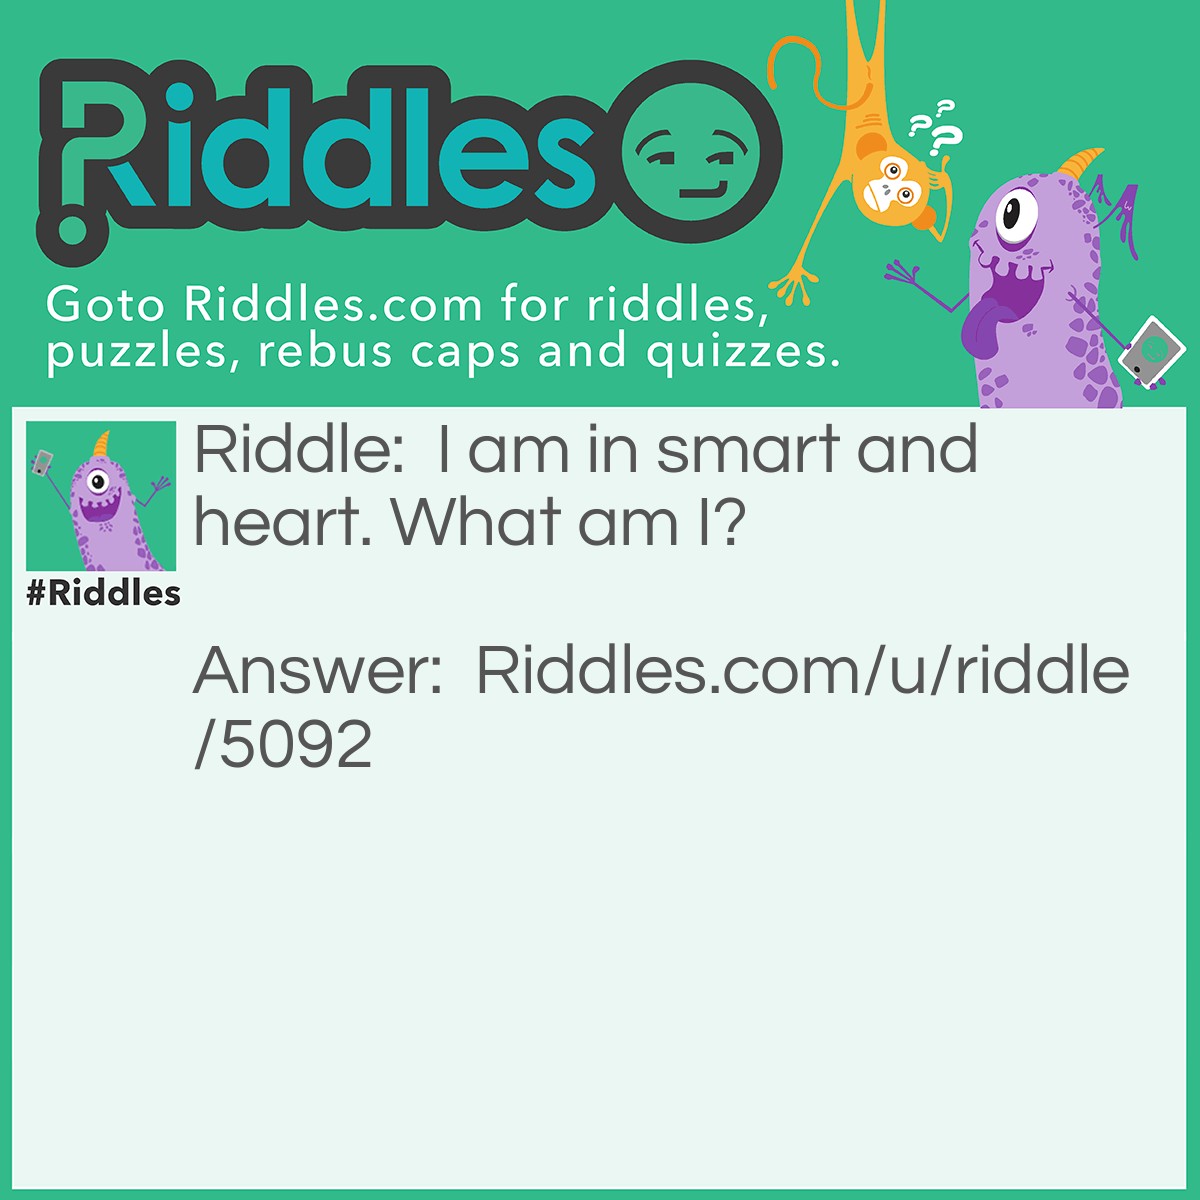 Riddle: I am in smart and heart. What am I? Answer: Art.